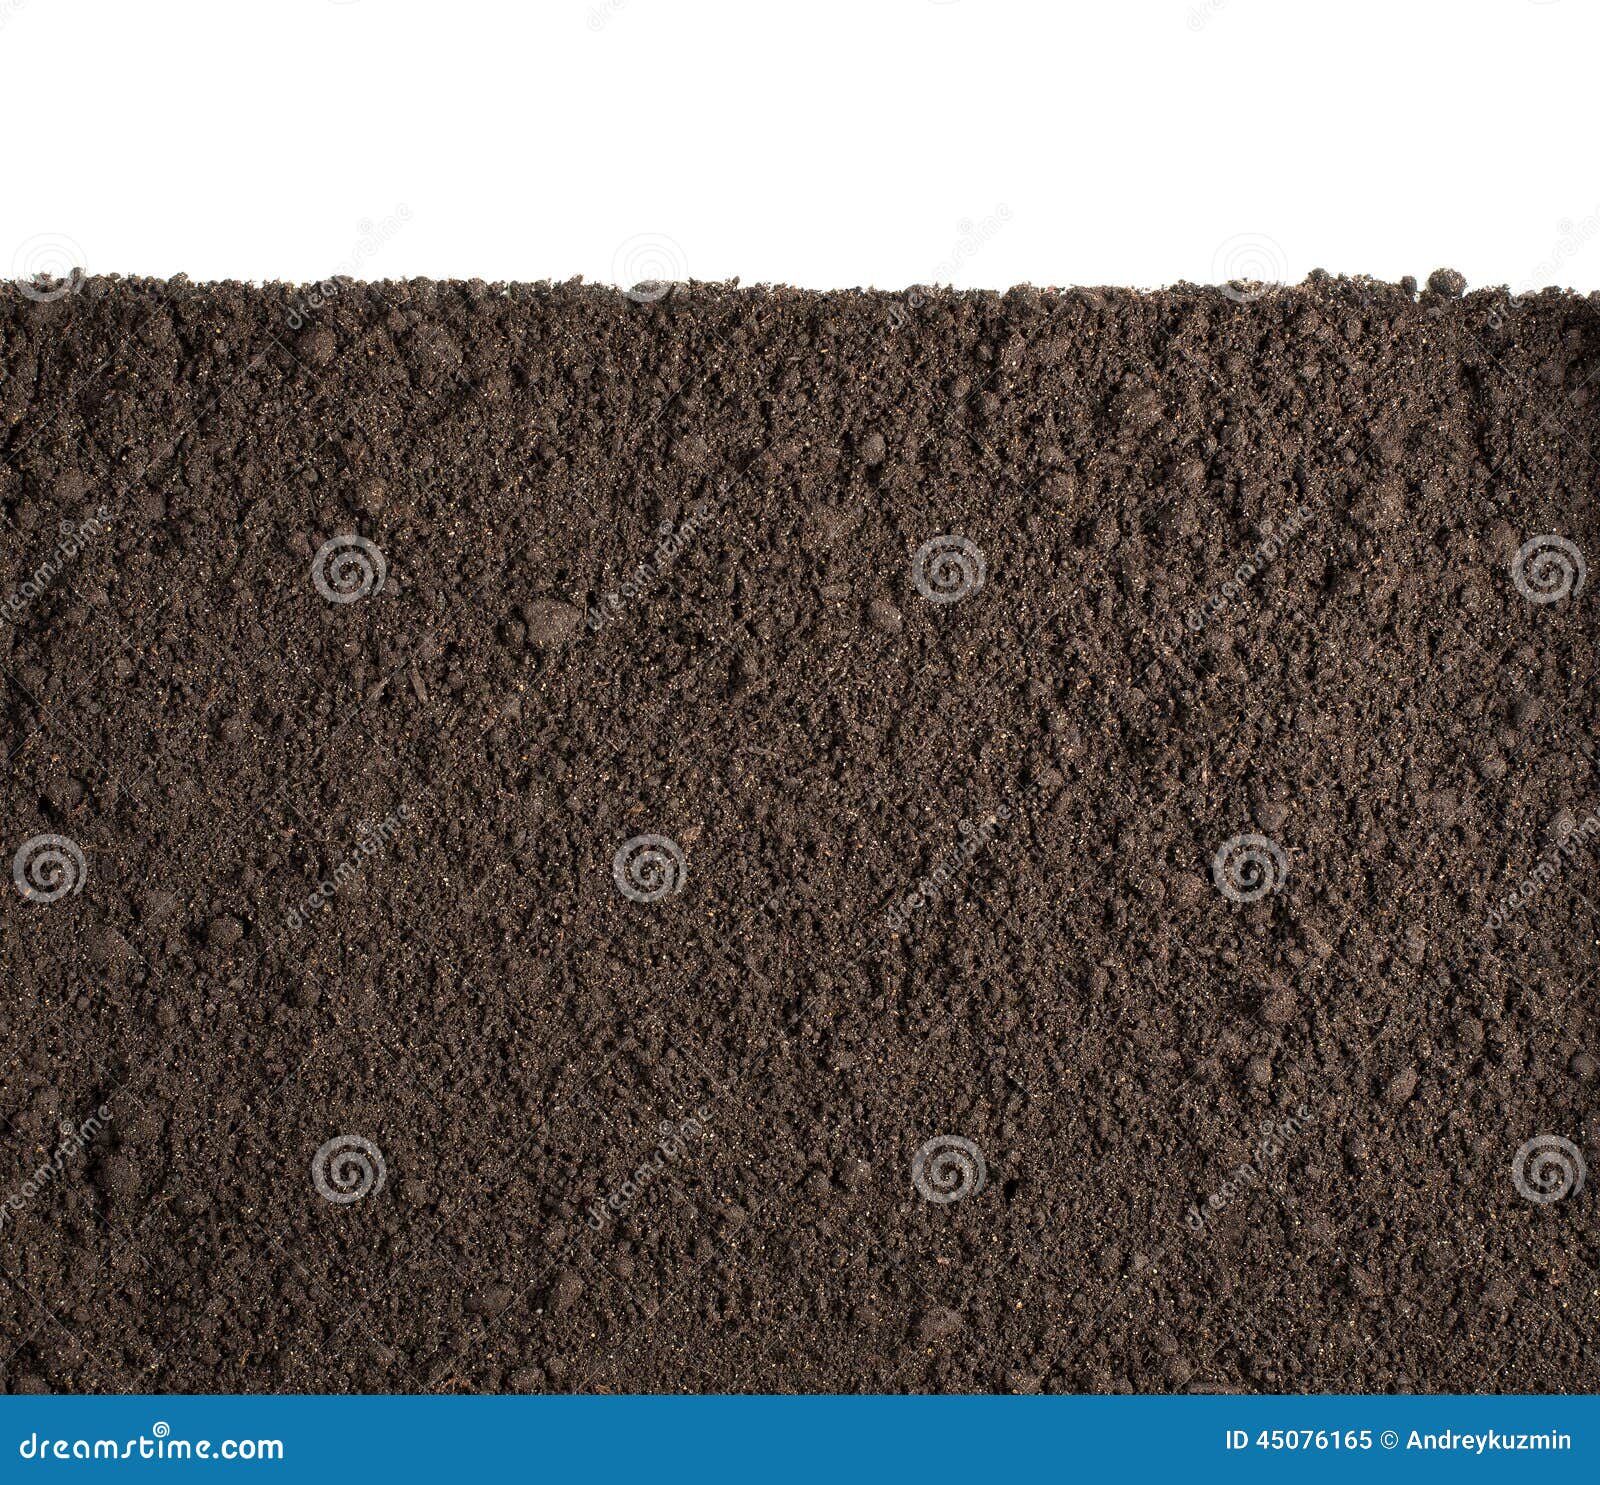 soil or dirt section  on white background